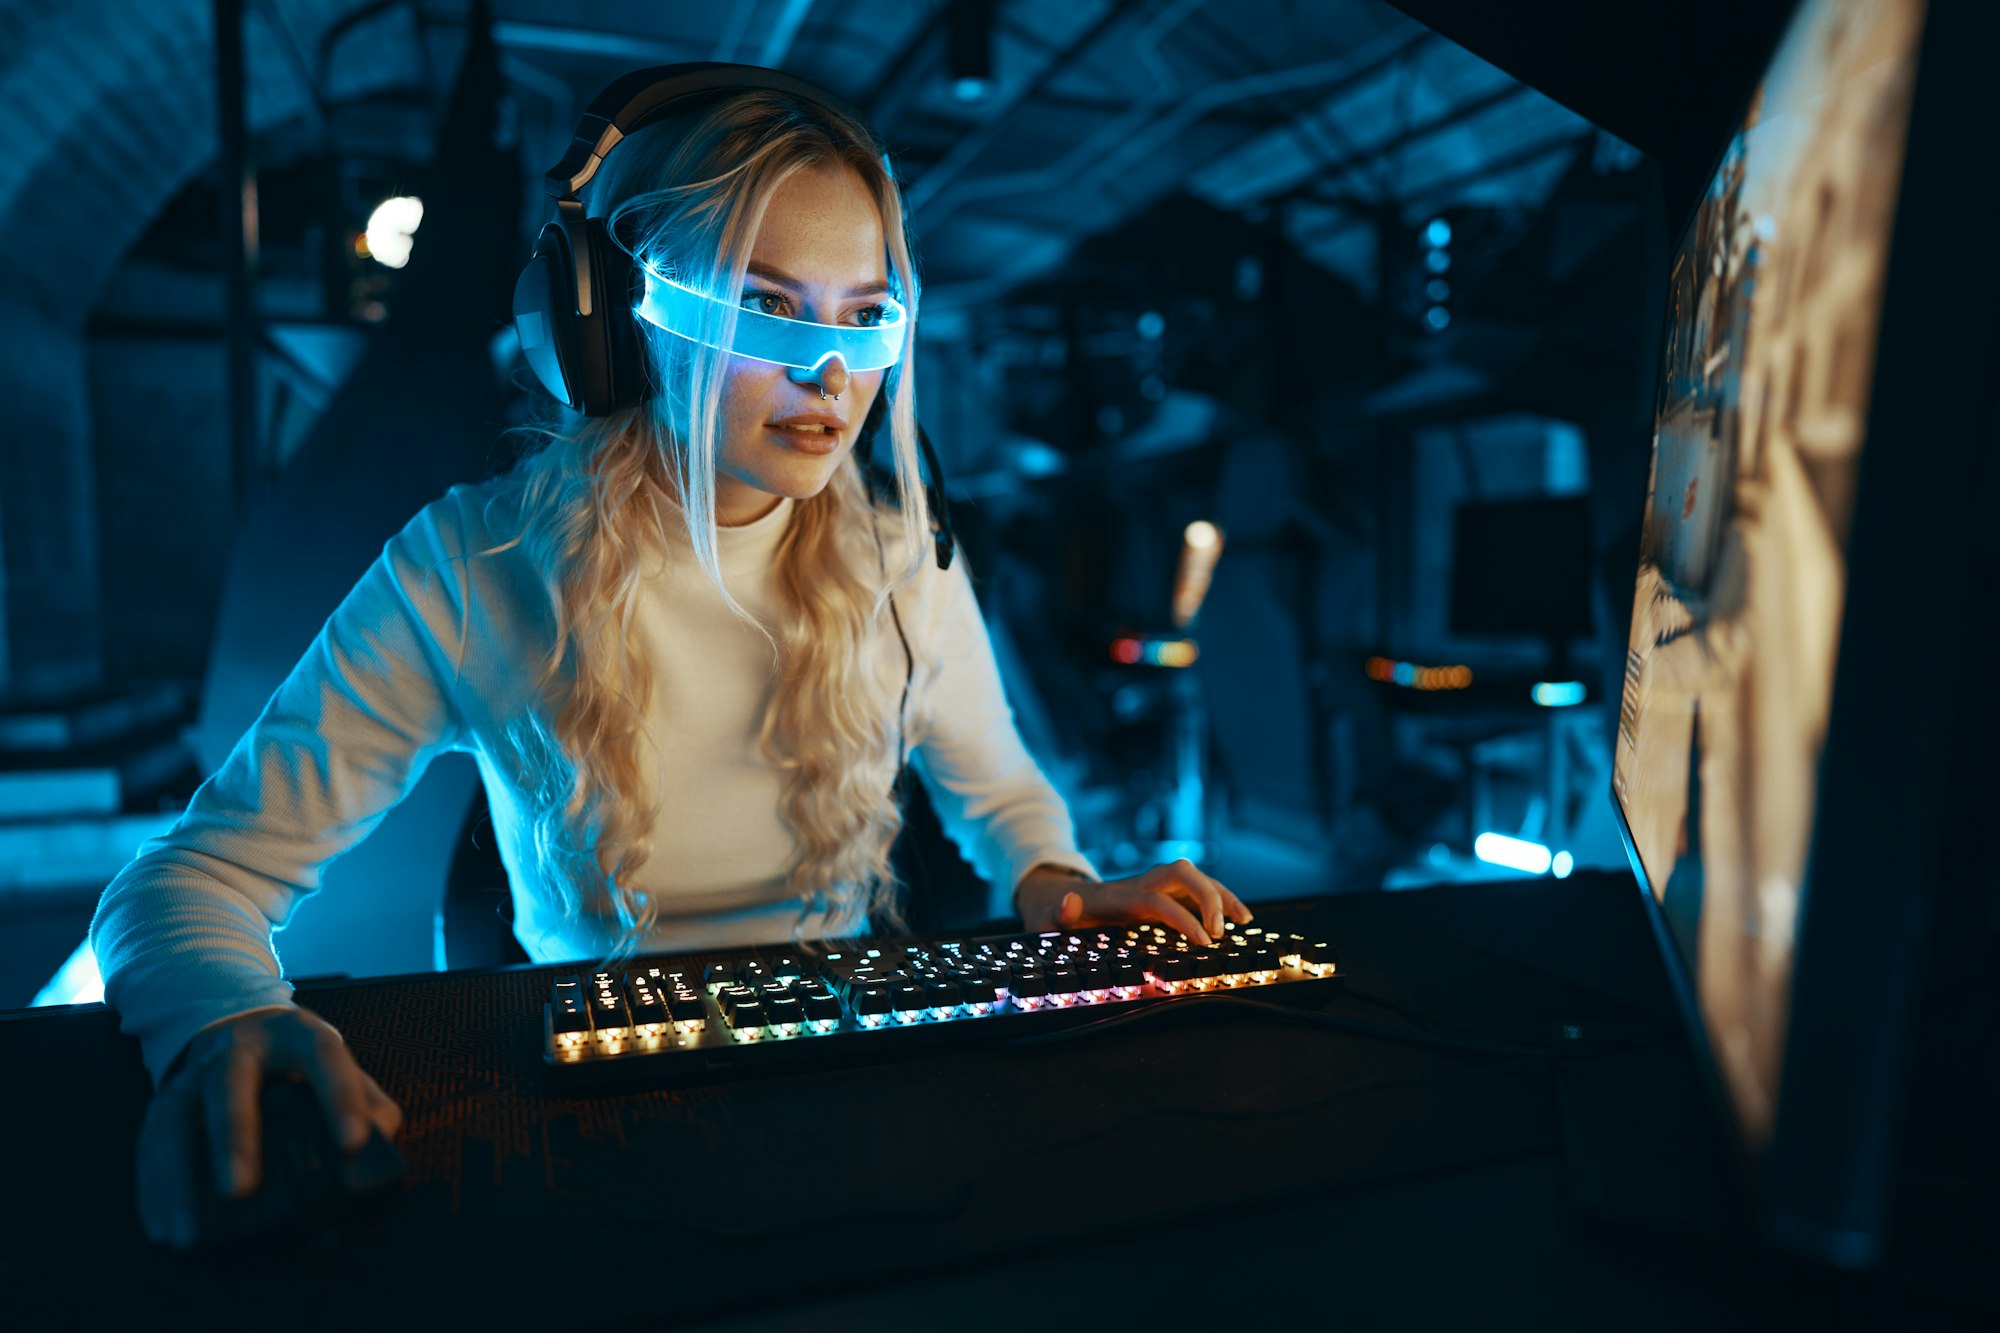 The blonde is playing a computer game. Blogger in neon futuristic glasses.